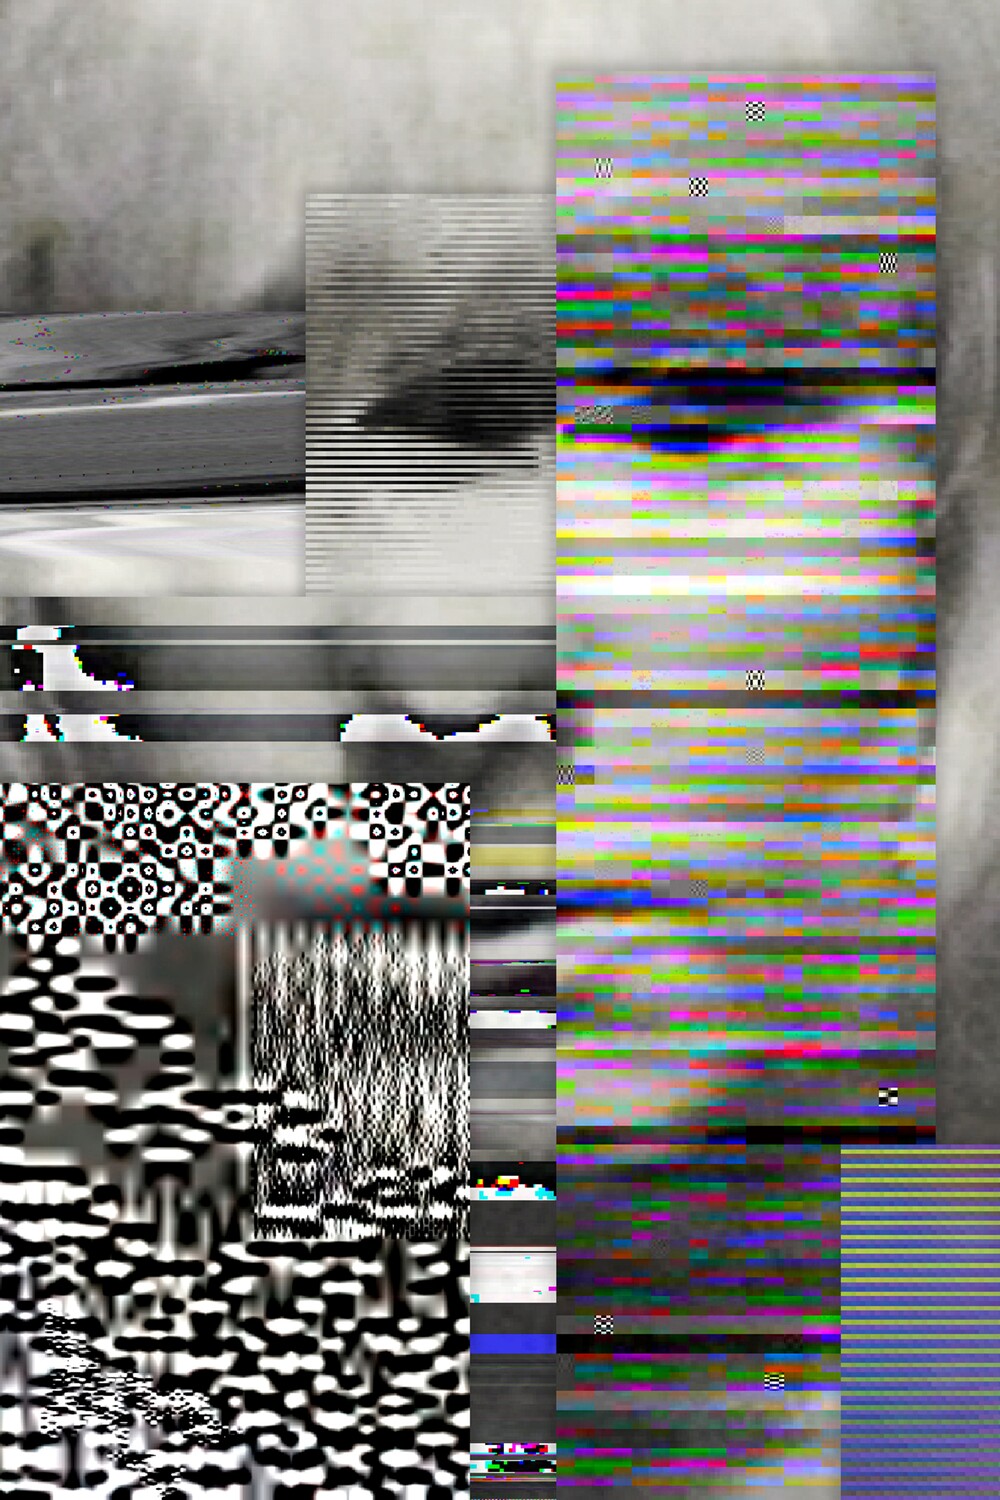 A glitched out portrait of a woman's face